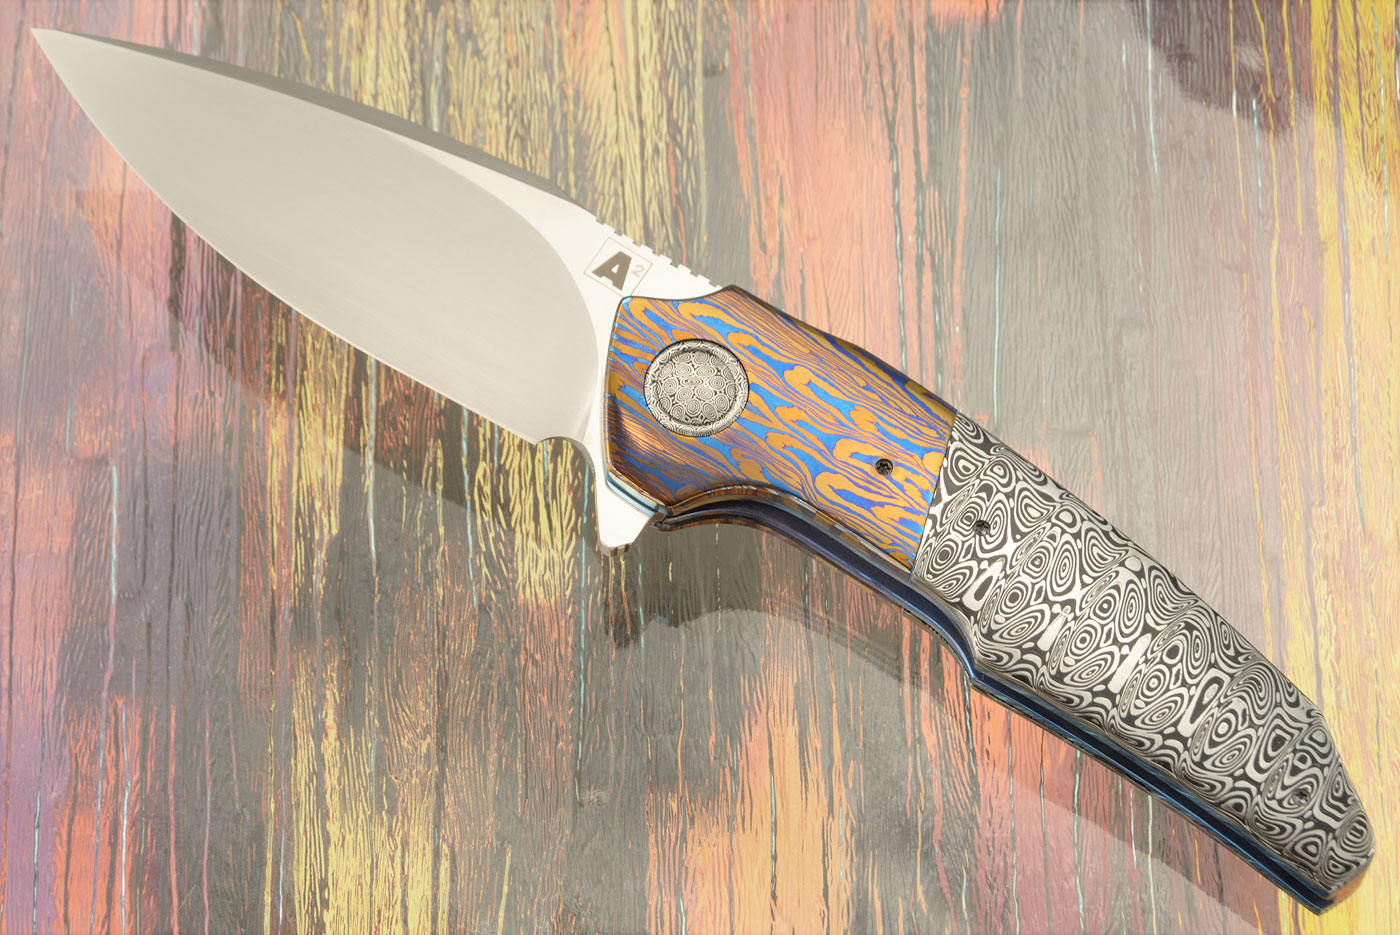 A6 Middi Dress with Timascus and Damasteel (Ceramic IKBS) - M390